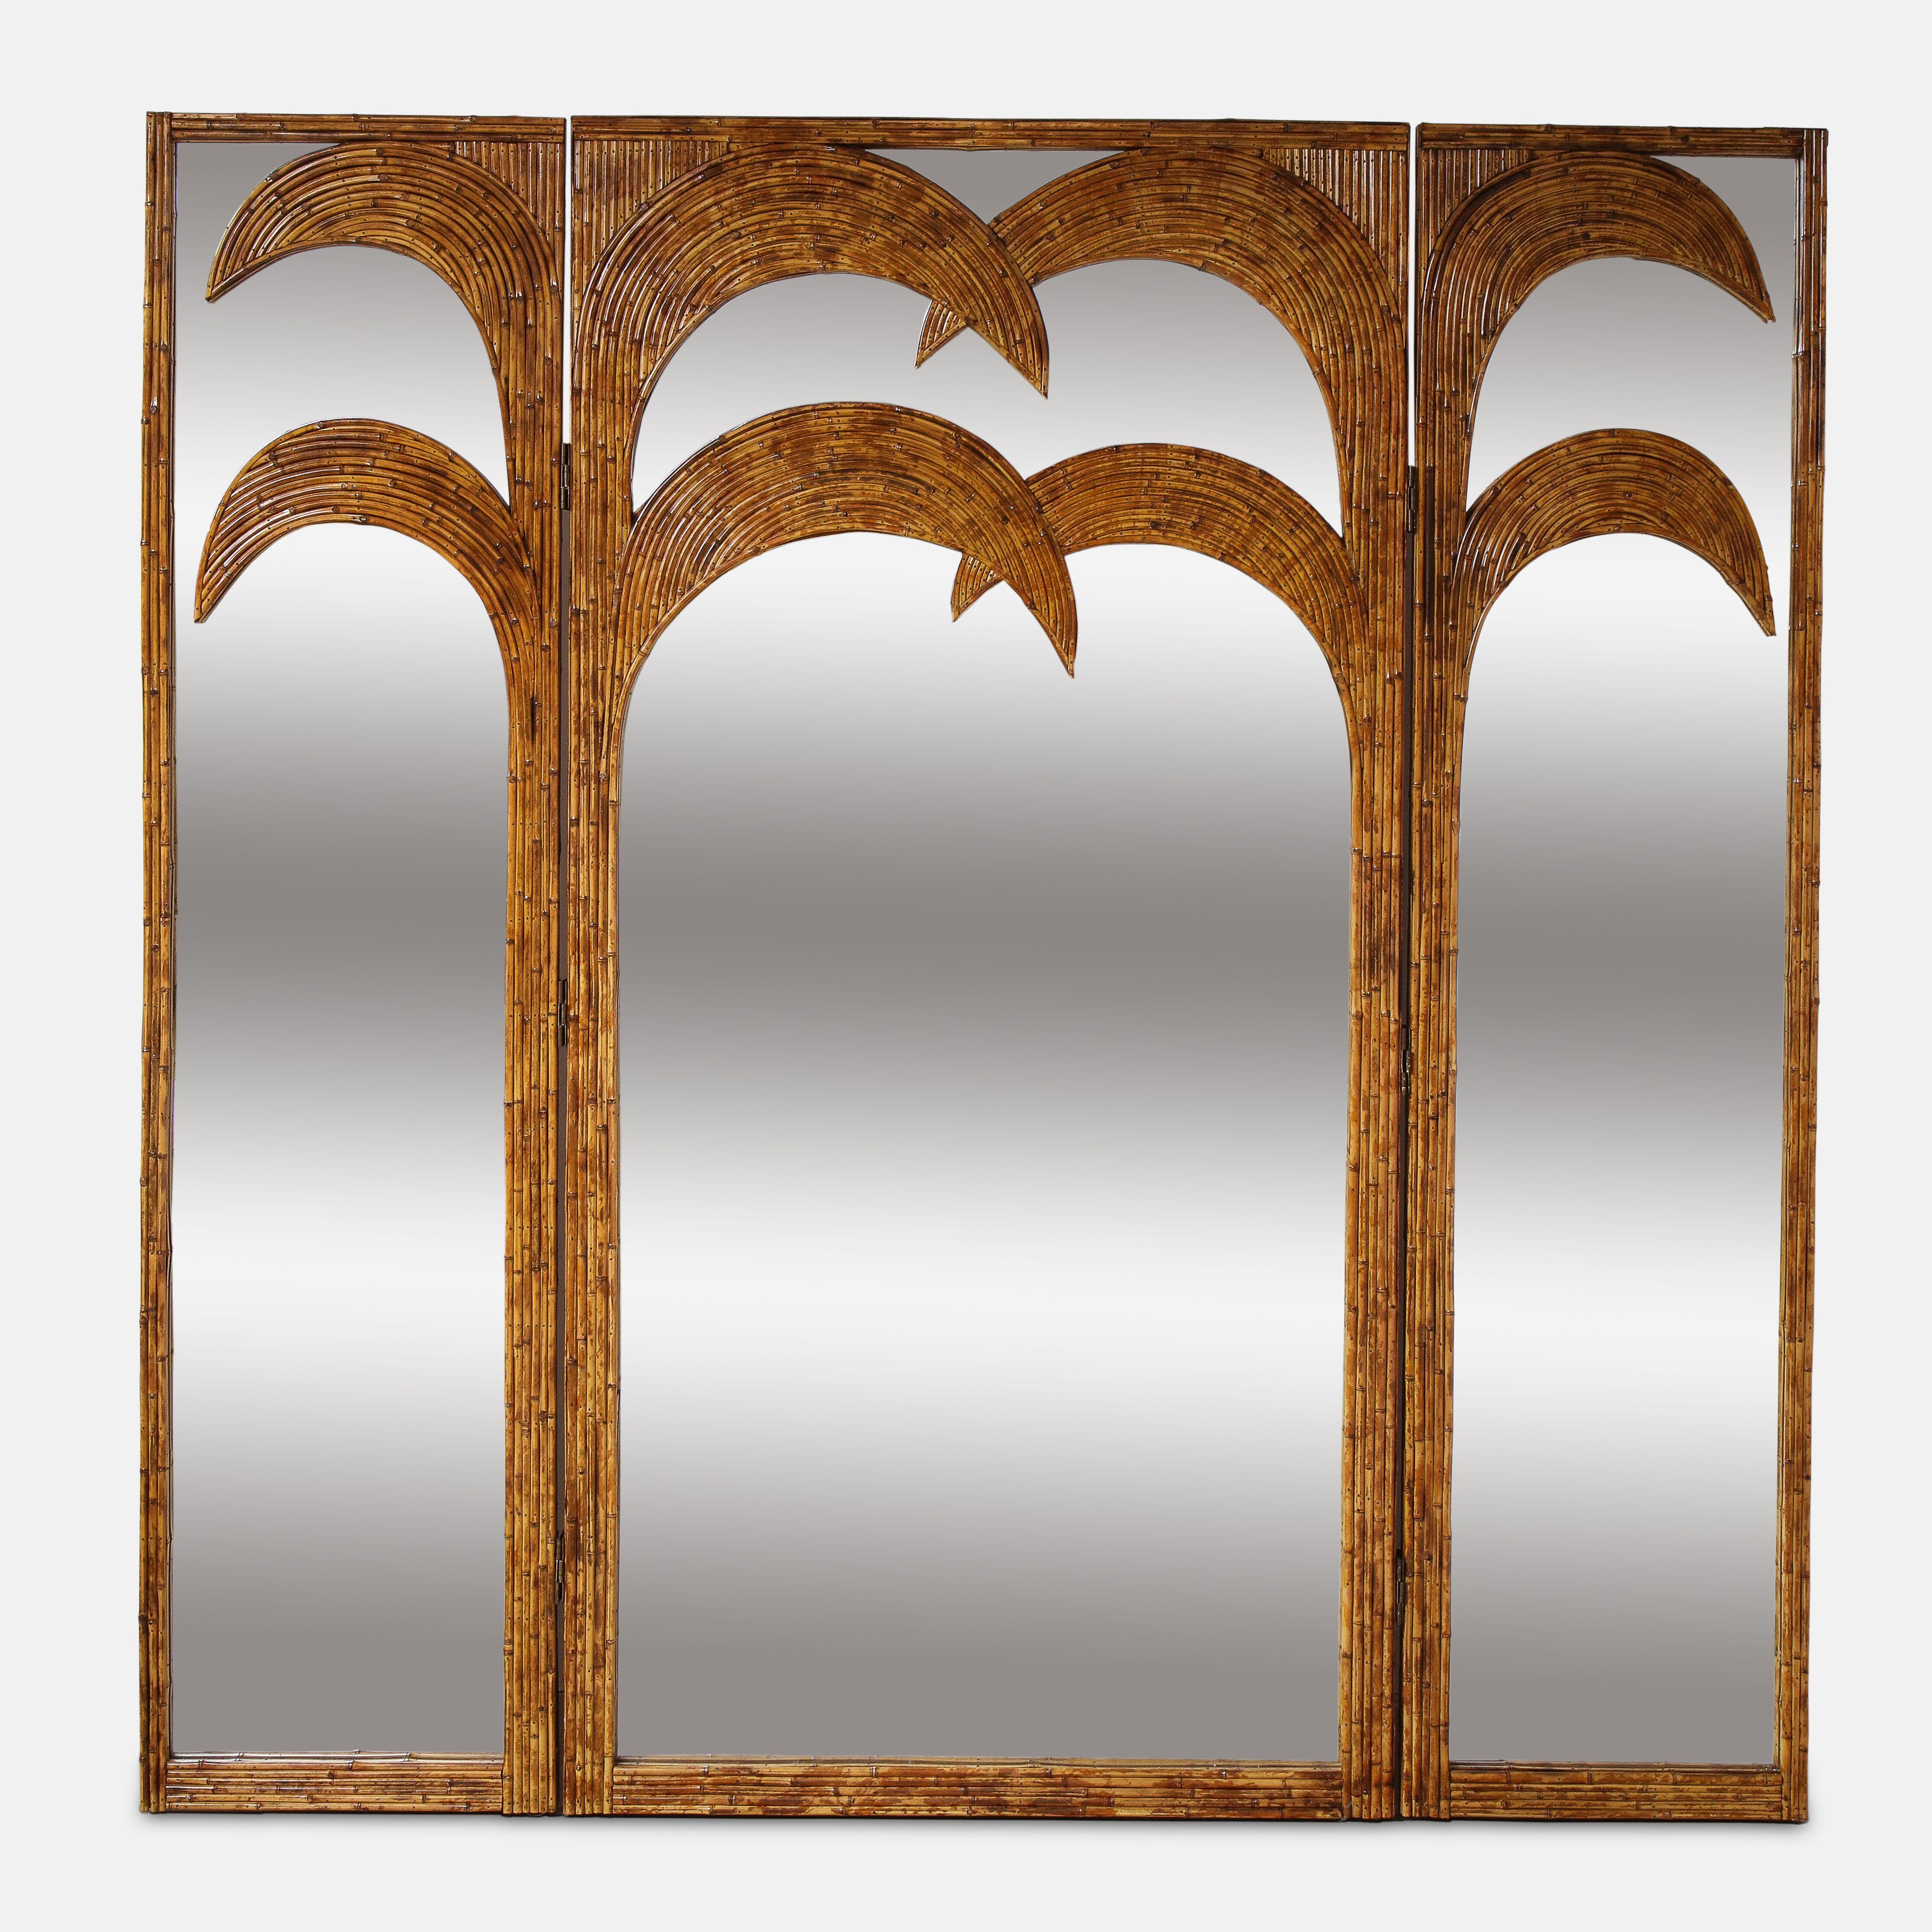 Vivai del Sud bamboo mirrored screen from the 'Parma' series, Italy, 1970s. This exquisite screen consists of bamboo palm tree motif inlay on a 3-panel mirrored screen. These panels are expertly constructed from a padding over a wooden structure. On